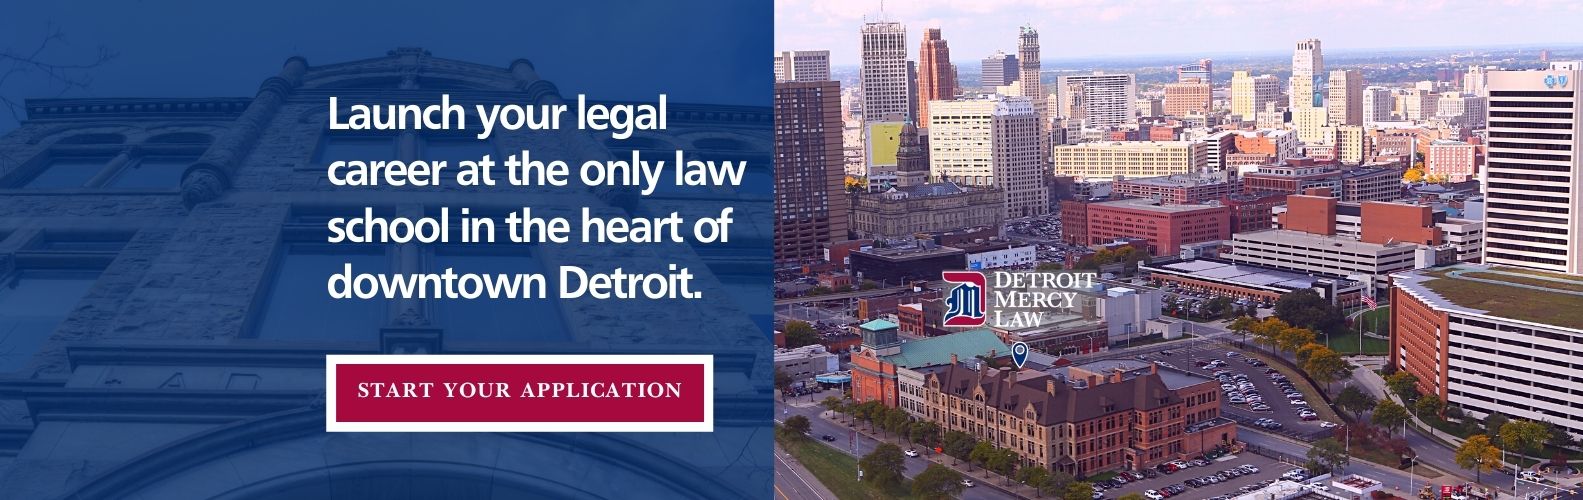 Launch your legal career at the only law school in the heart of Downtown Detroit. Start your application